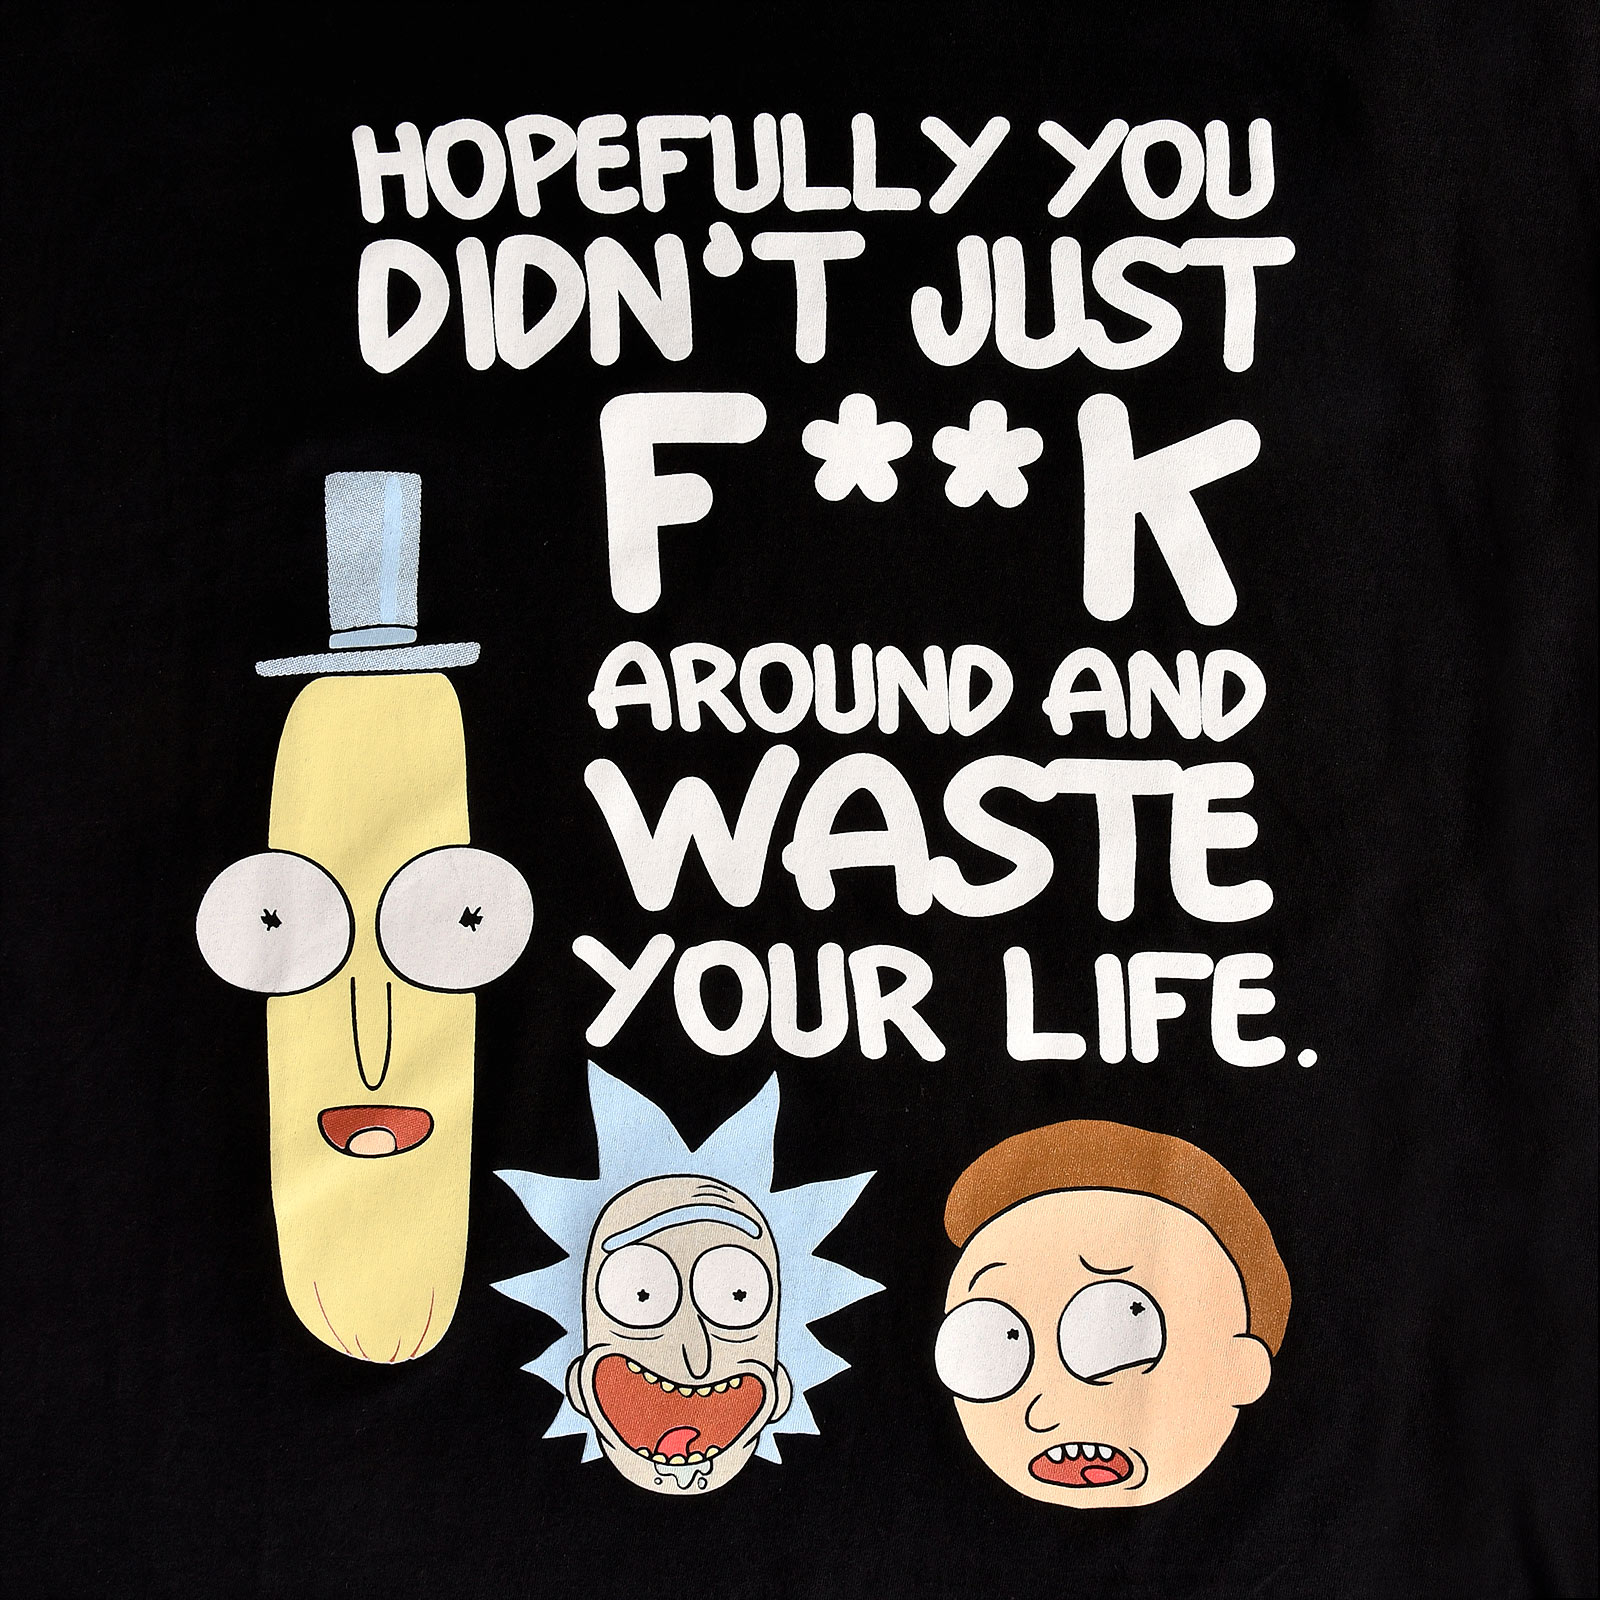 Rick and Morty - Waste Your Life T-Shirt schwarz